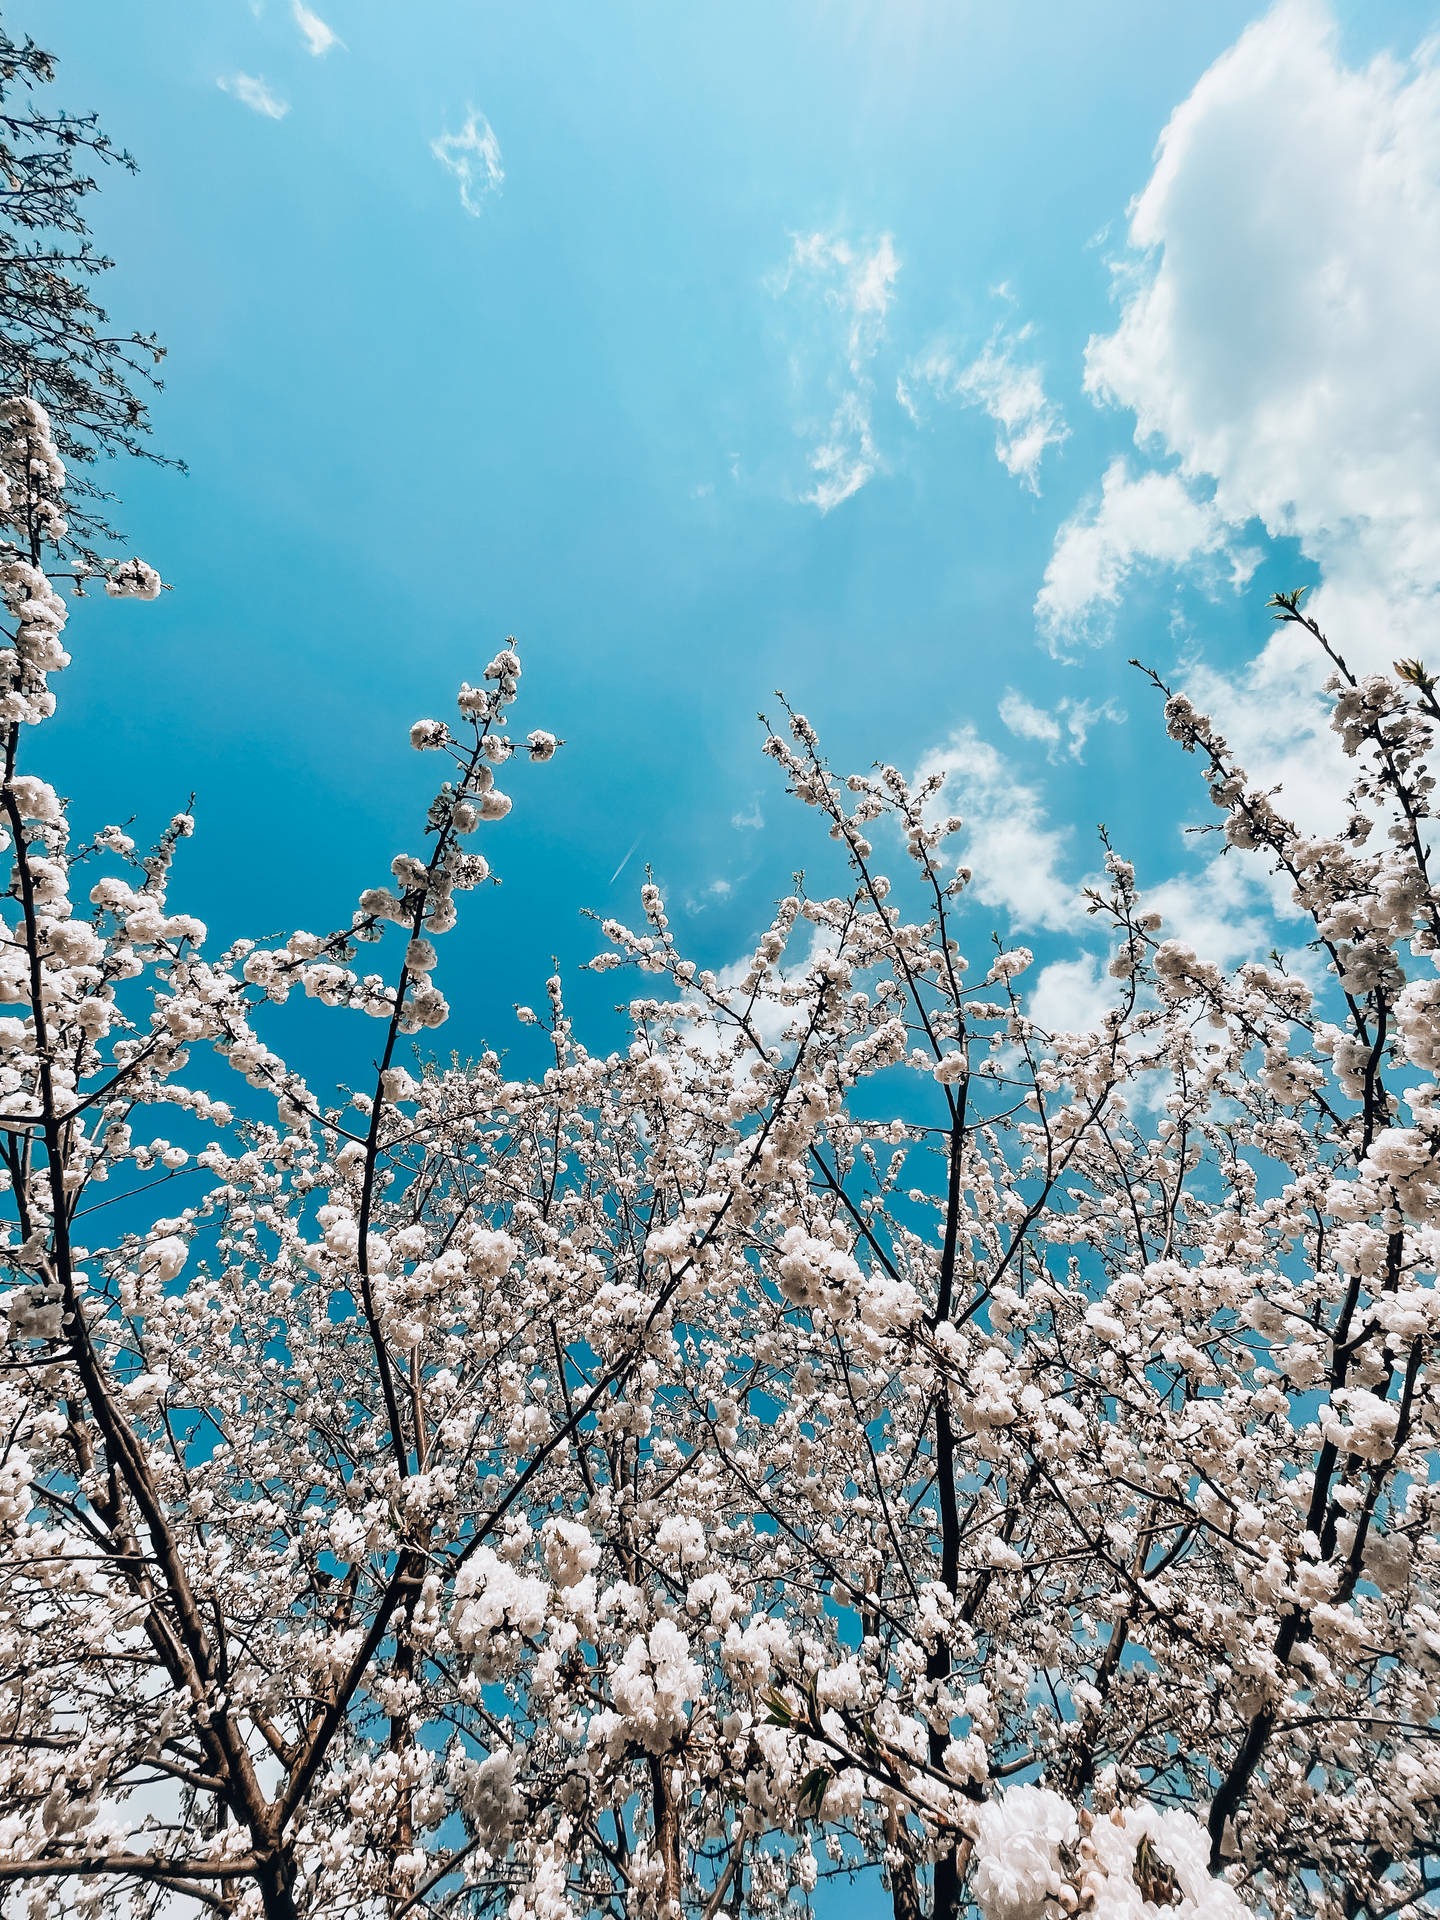 Sky Hd With Cherry Blossoms Wallpaper